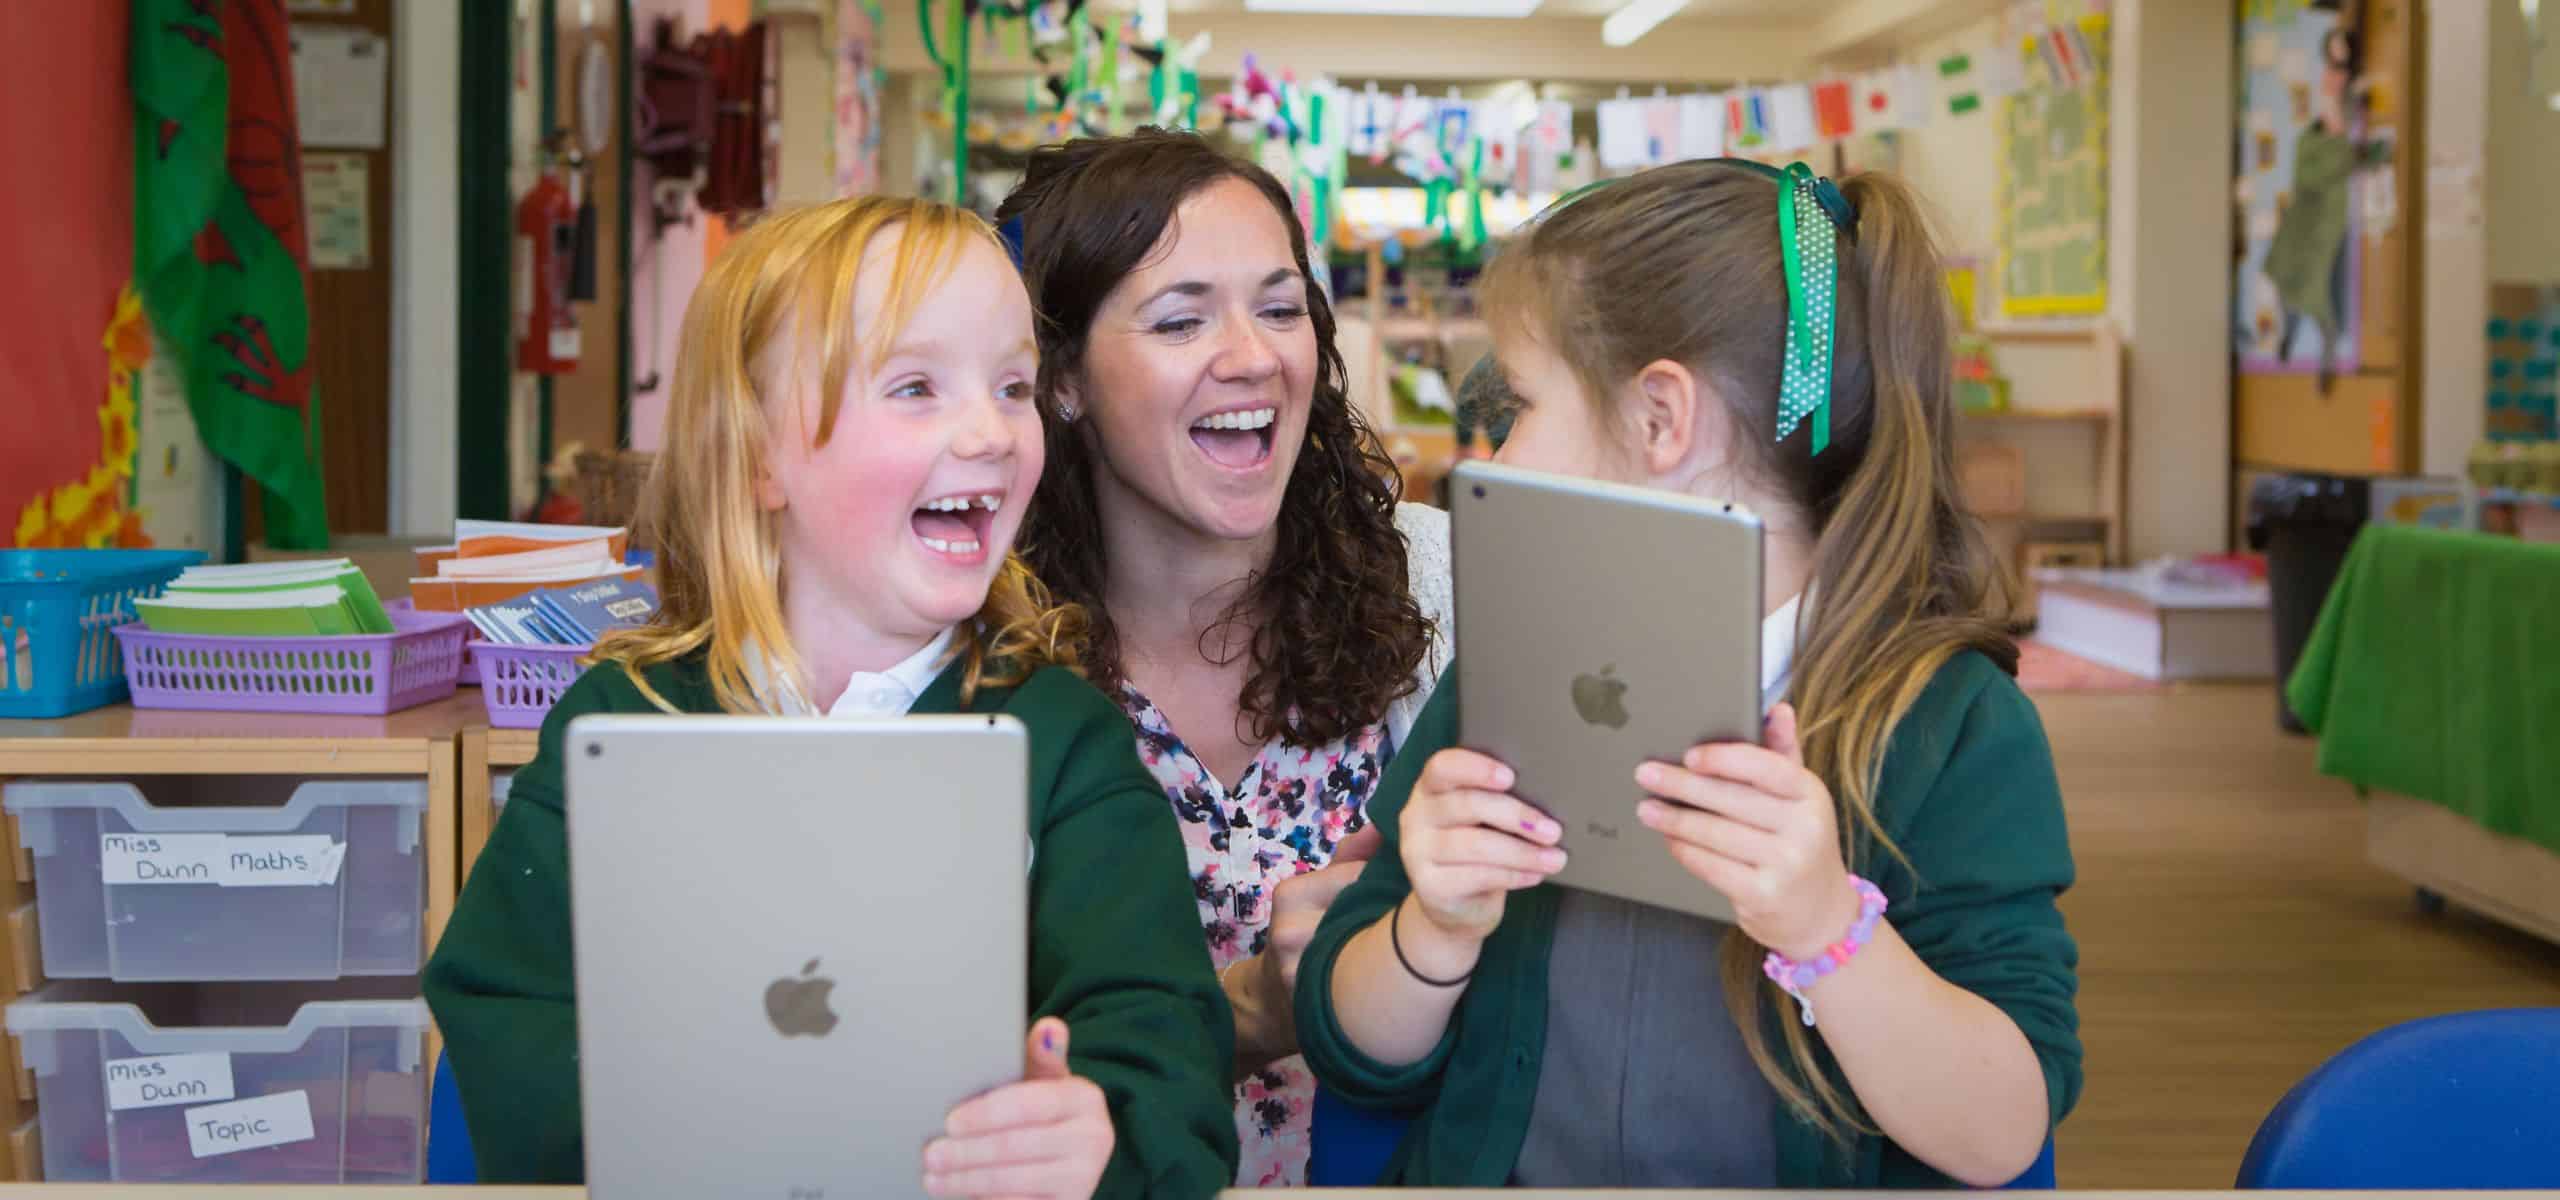 How To Deploy Apple in Education